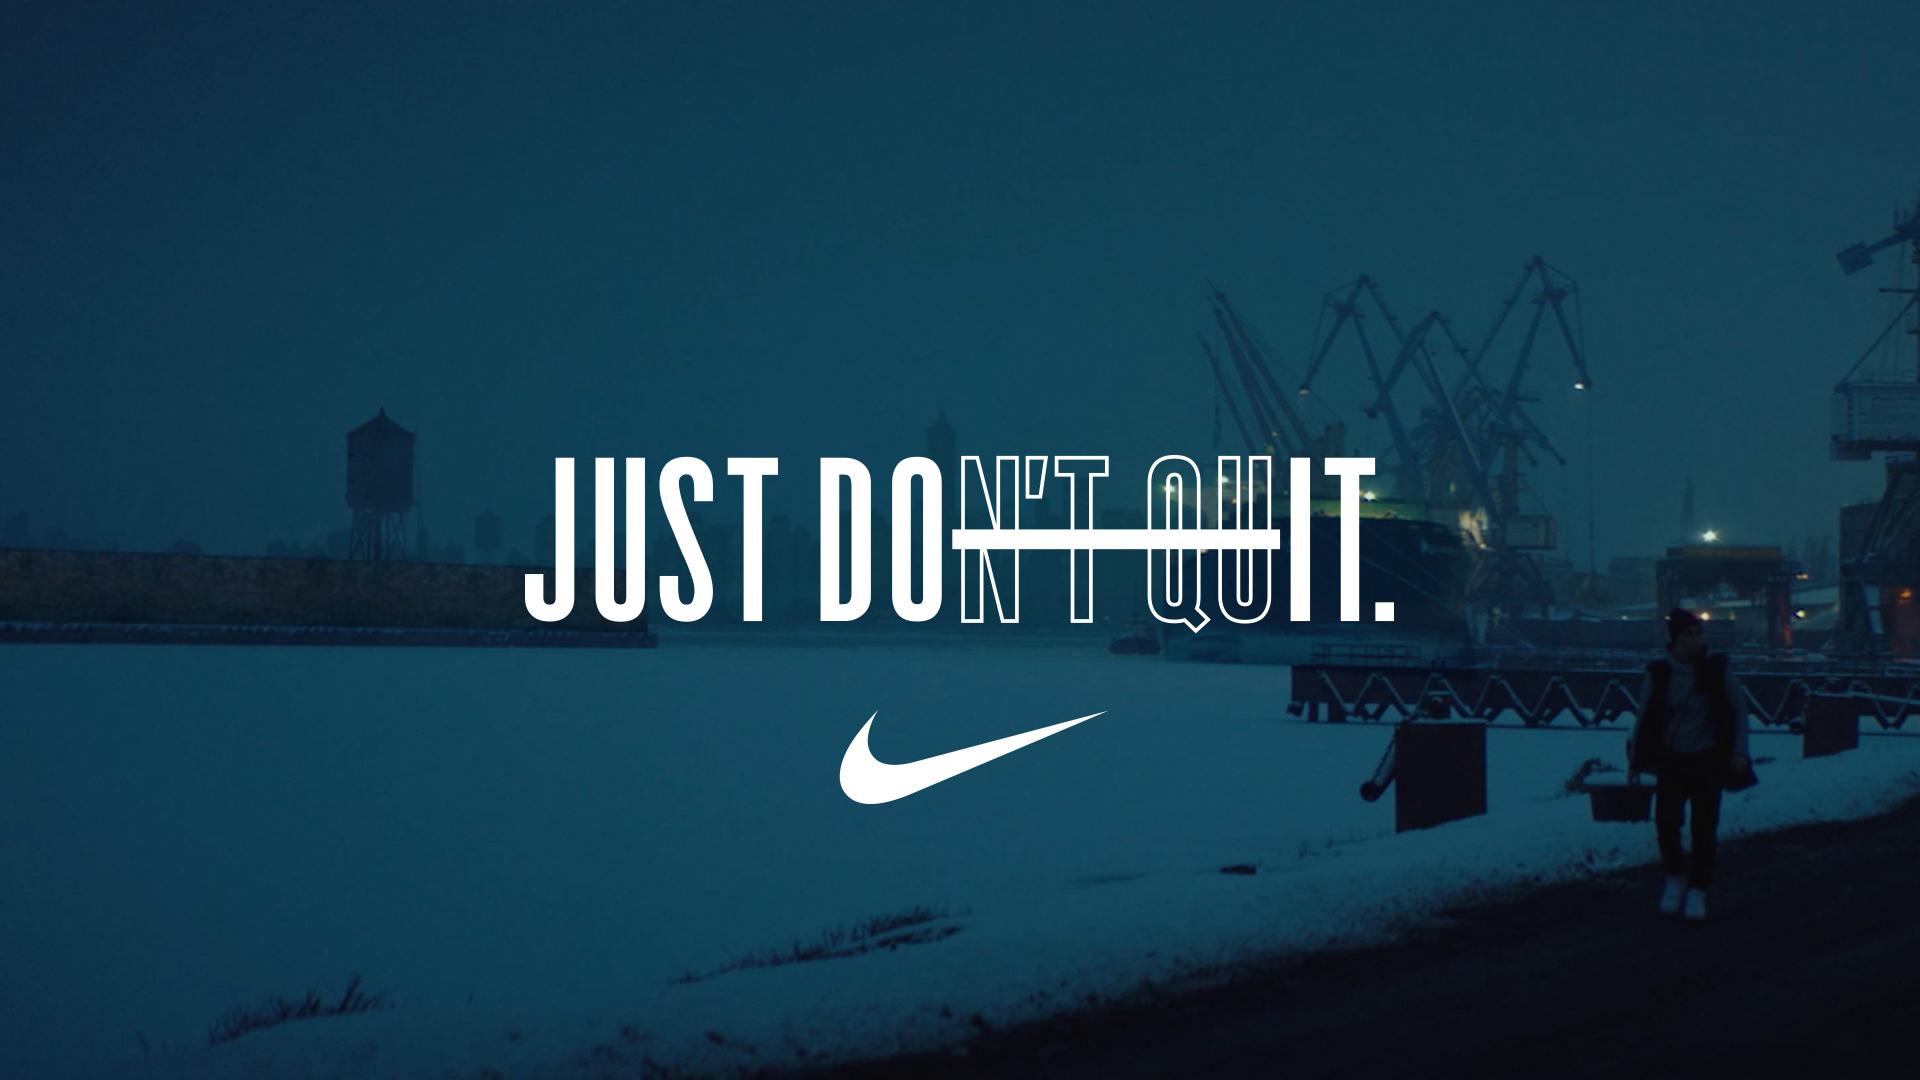 Just do it слоган. Nike just do it. Слоган найк. Just do it реклама. Кампания Nike "just do it".